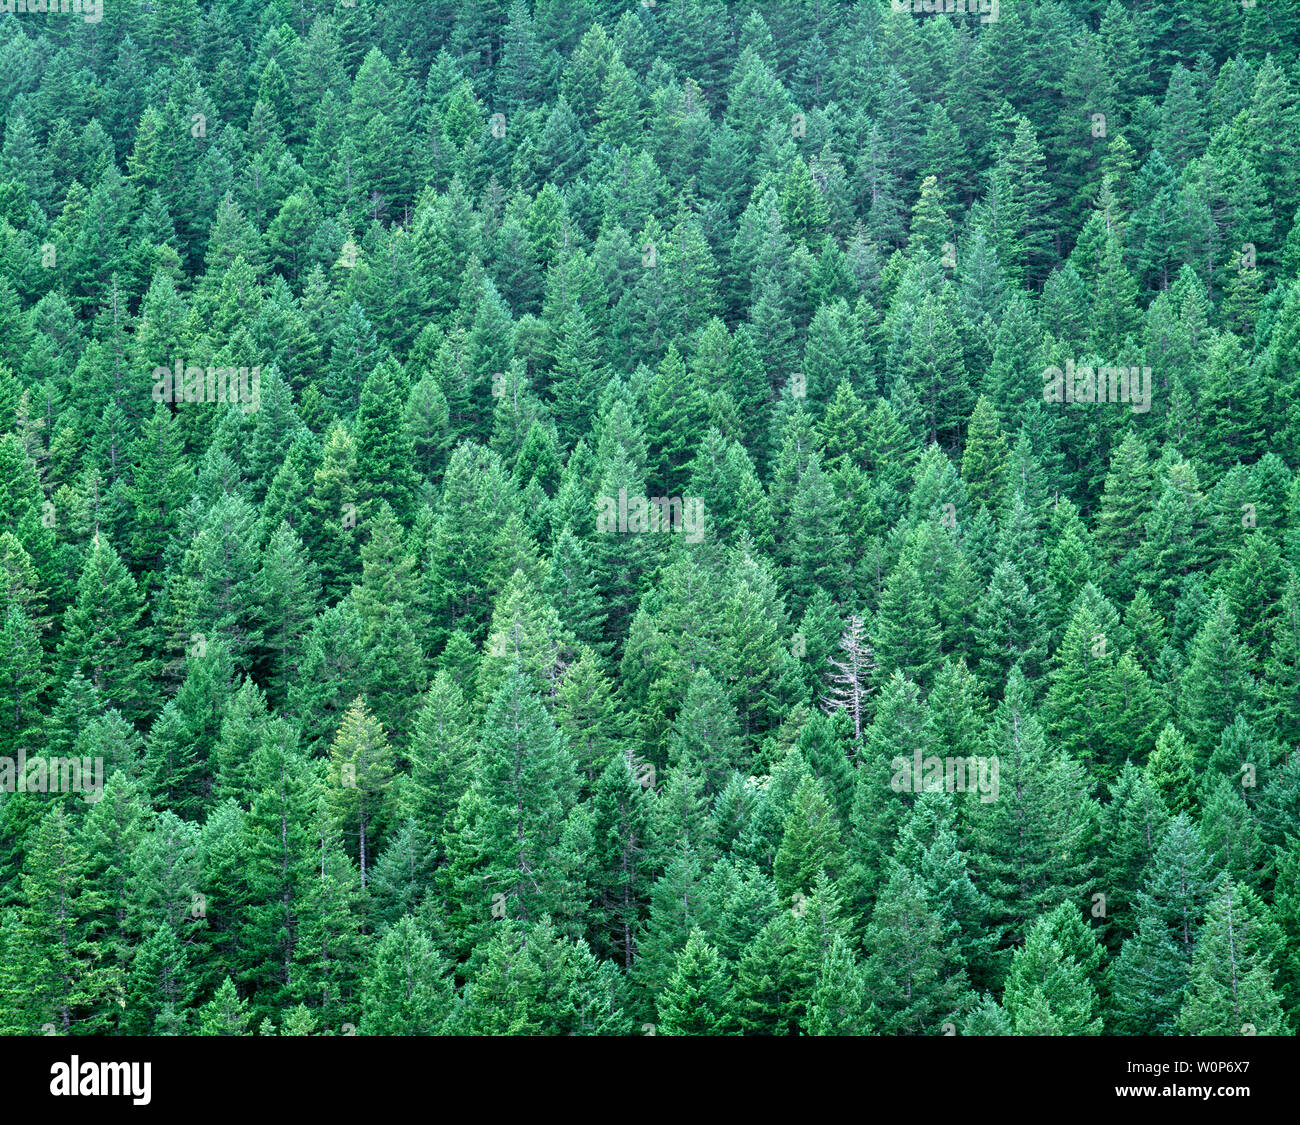 USA, Washington, Olympic National Forest, Old growth conifers forest comprised primarily of Douglas fir from the drier east side of Olympic Peninsula. Stock Photo